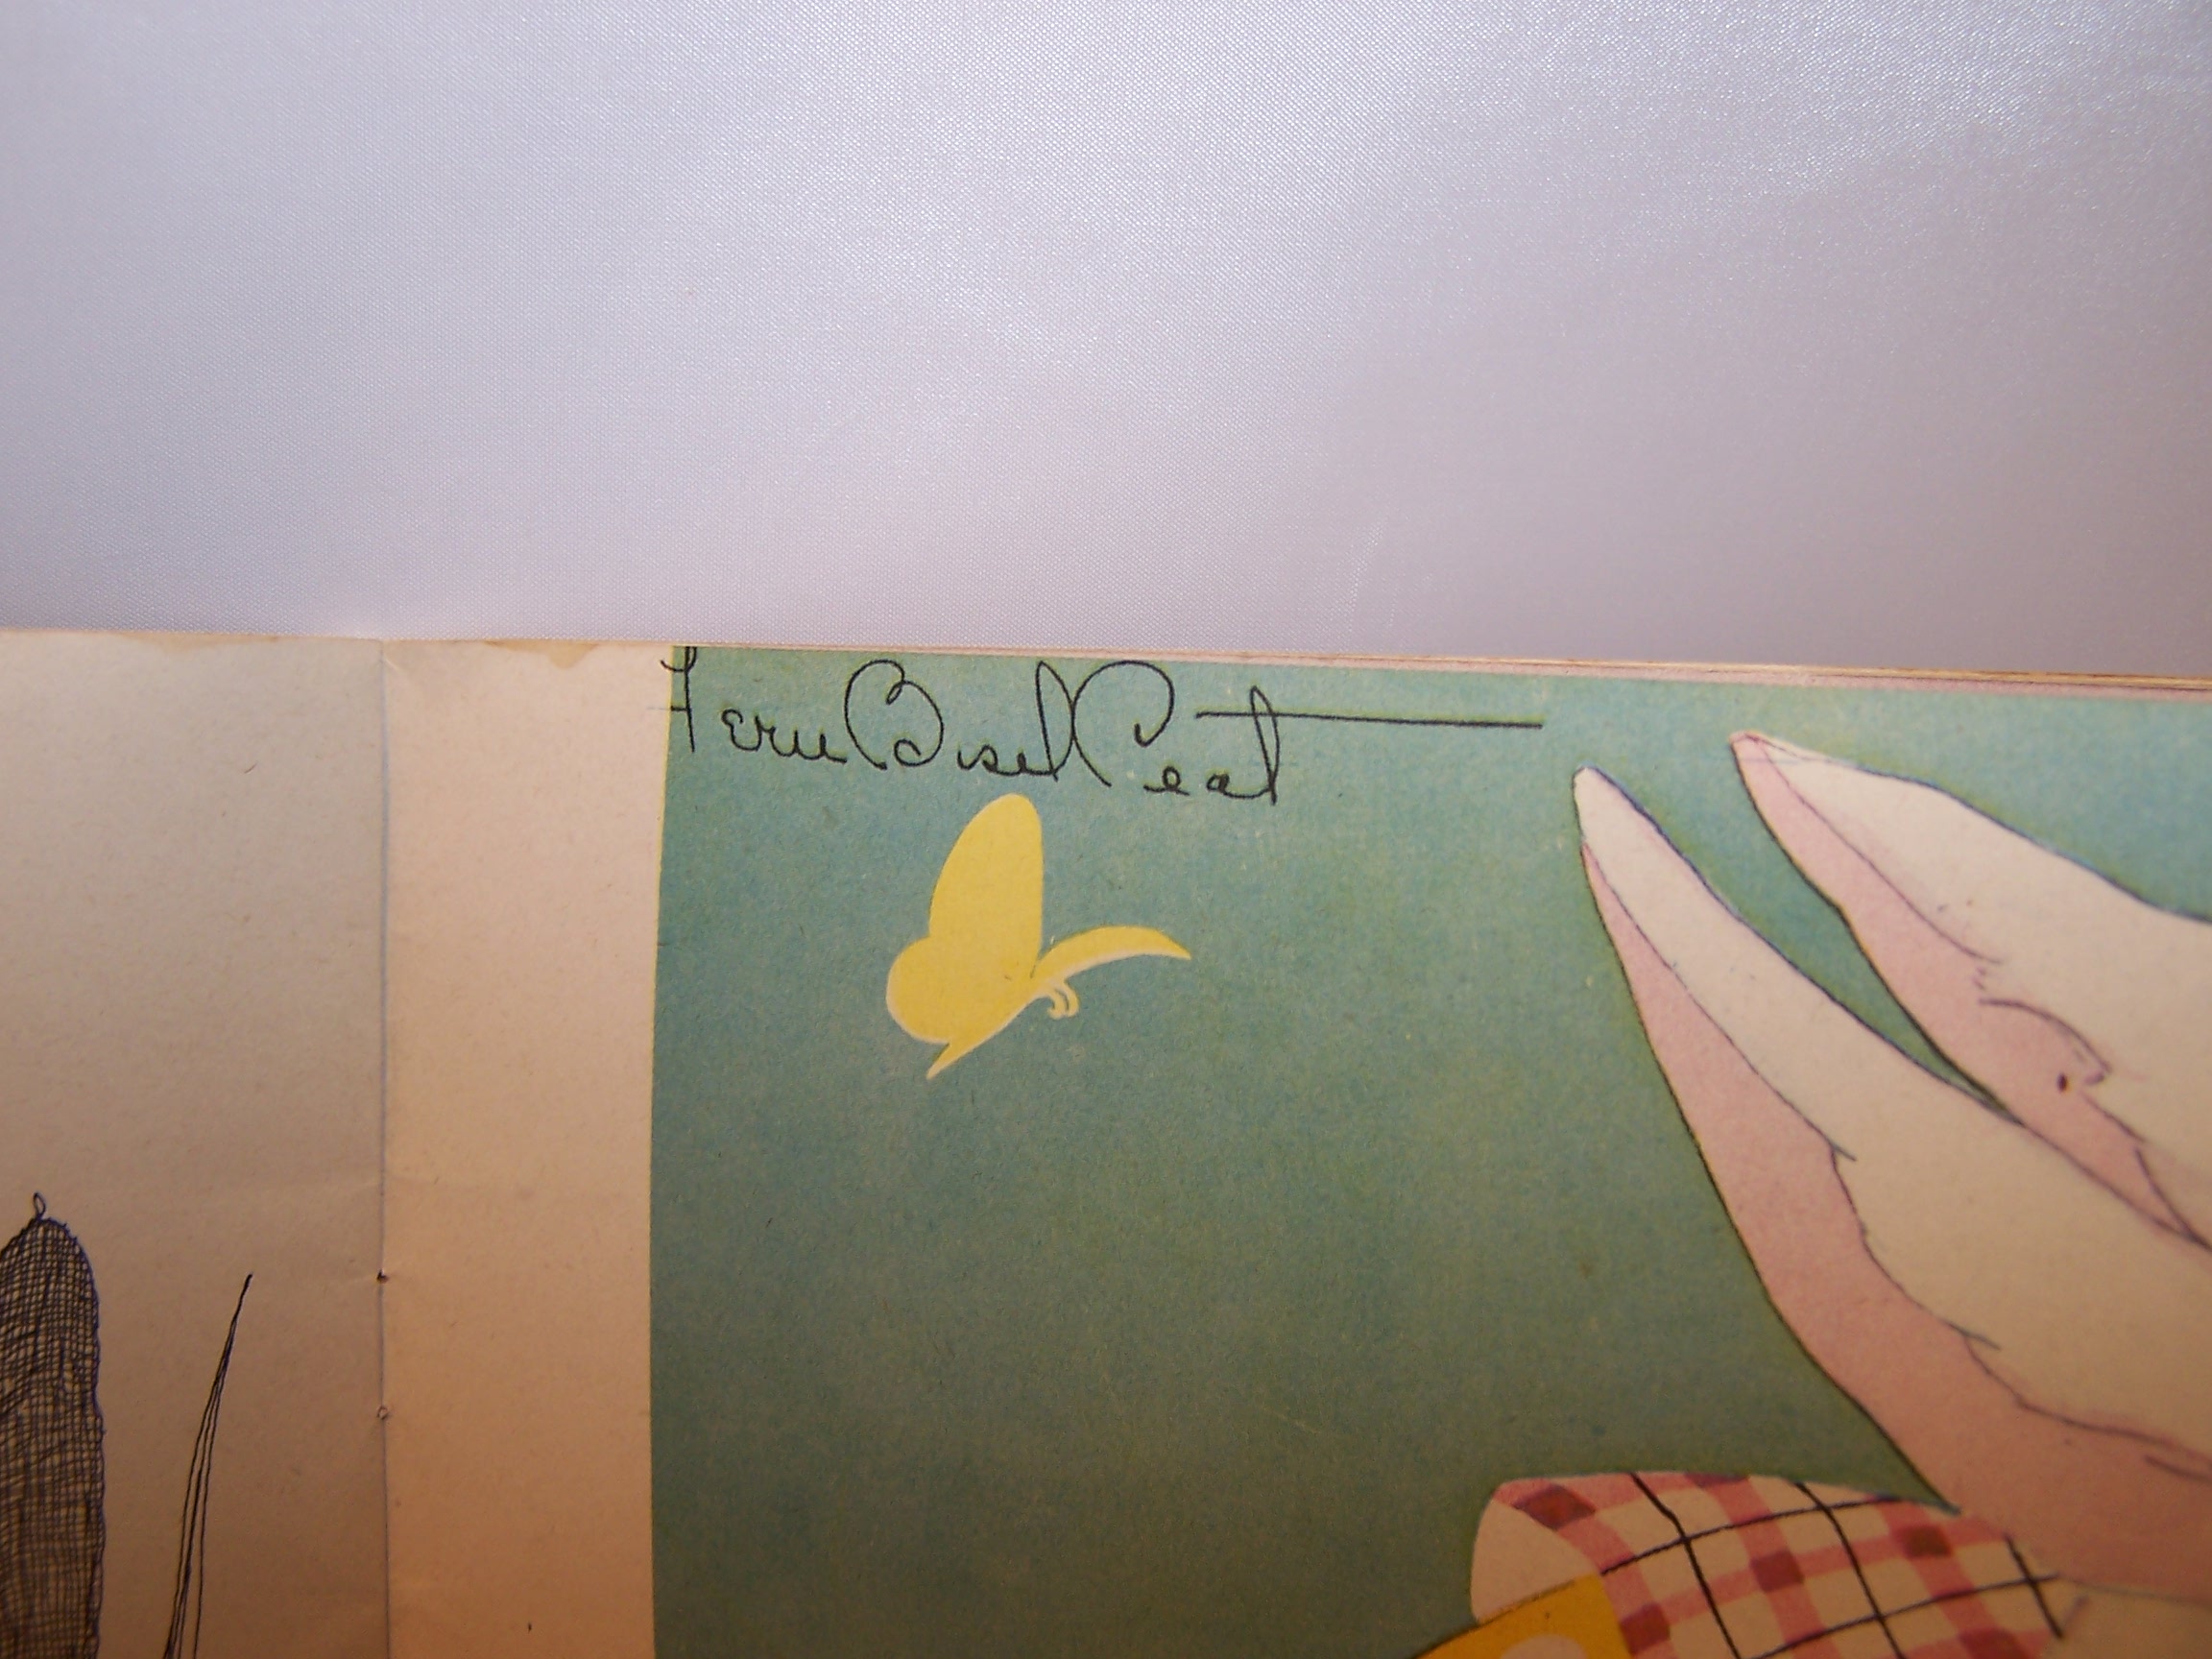 Image 9 of Peter Rabbit Book, Storybook, 1946, Aldredge and McKee, Prang Company Publishers